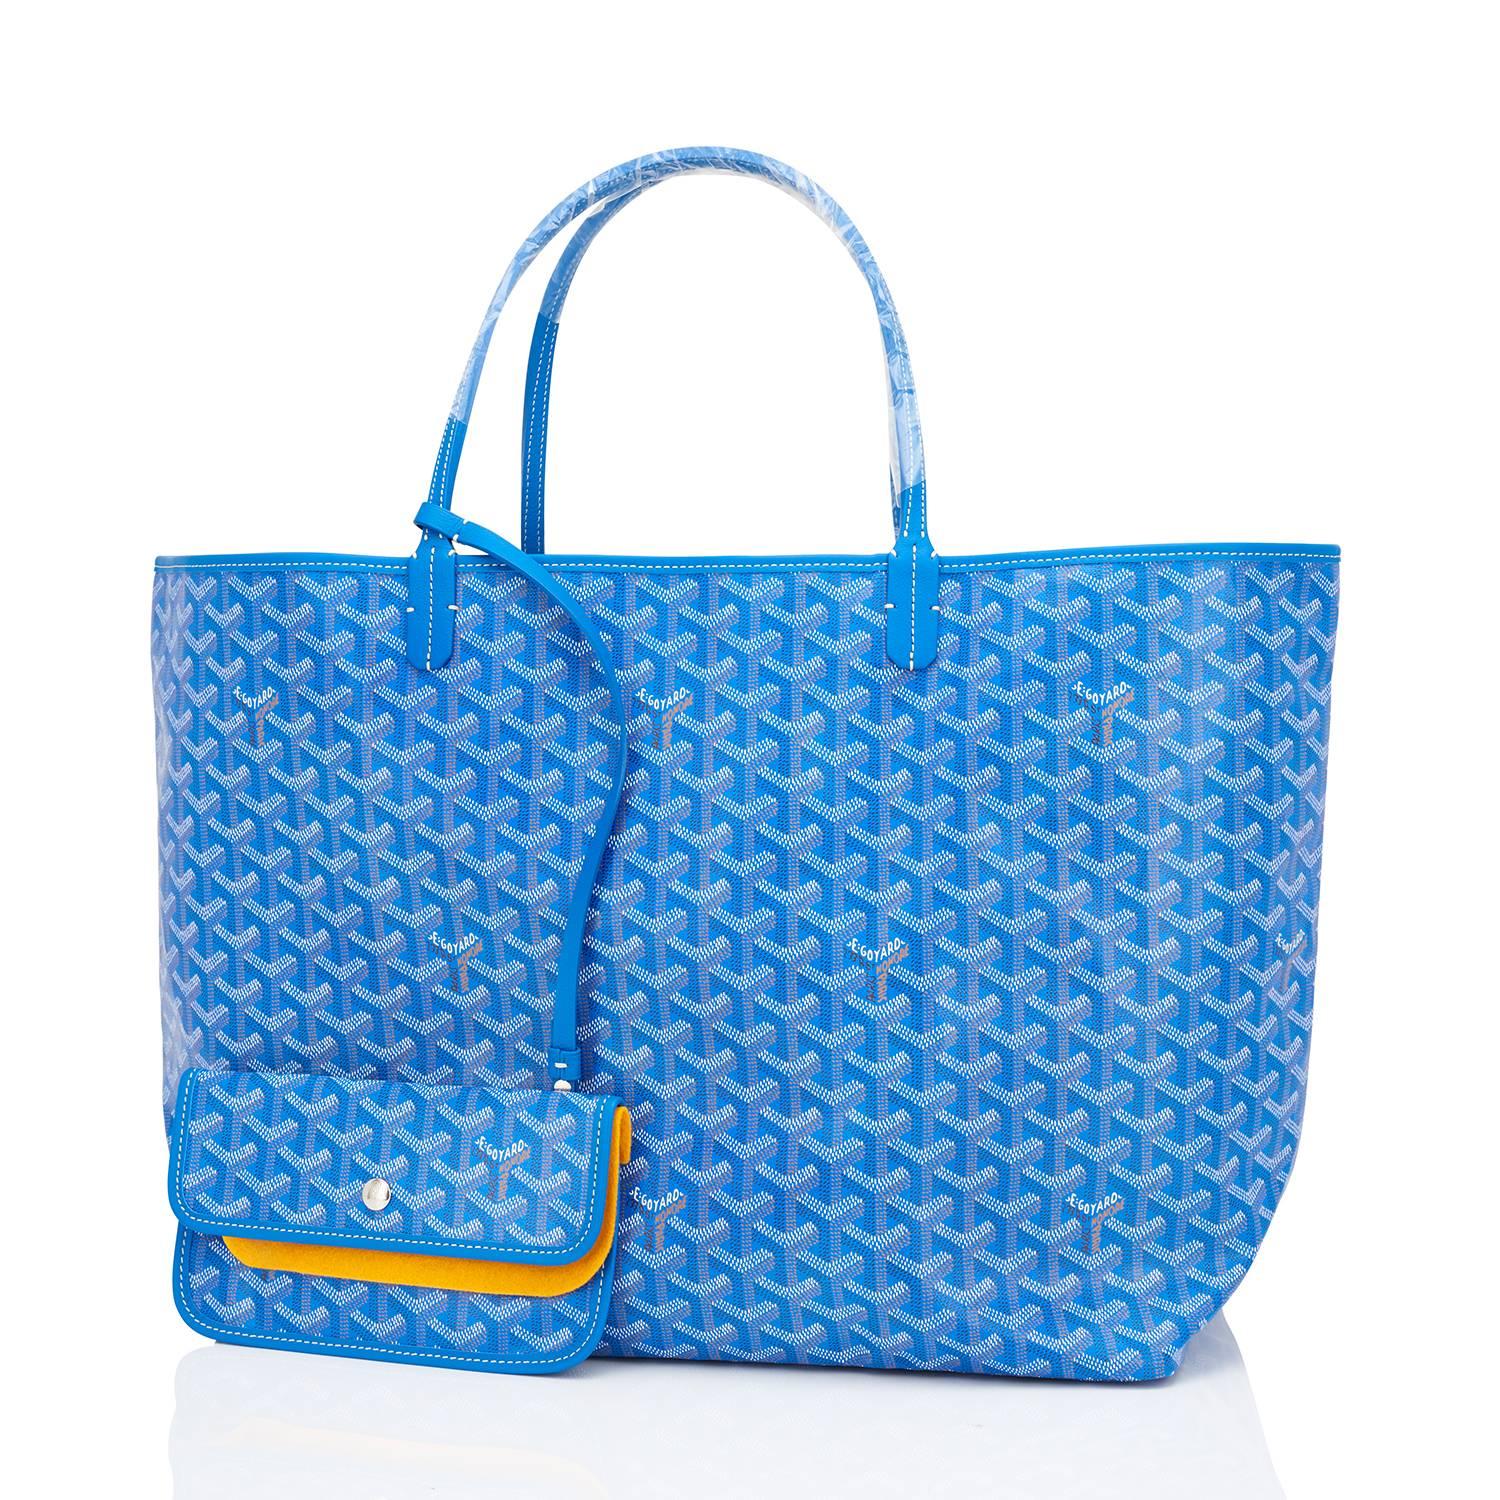 Goyard Bleu Claire St Louis GM Chevron Tote Bag 
Brand New. Store Fresh. Pristine Condition (with plastic on handles) 
Perfect gift! Comes with yellow Goyard sleeper and inner organizational pochette. 
This is the famous Goyard Chevron Tote in the